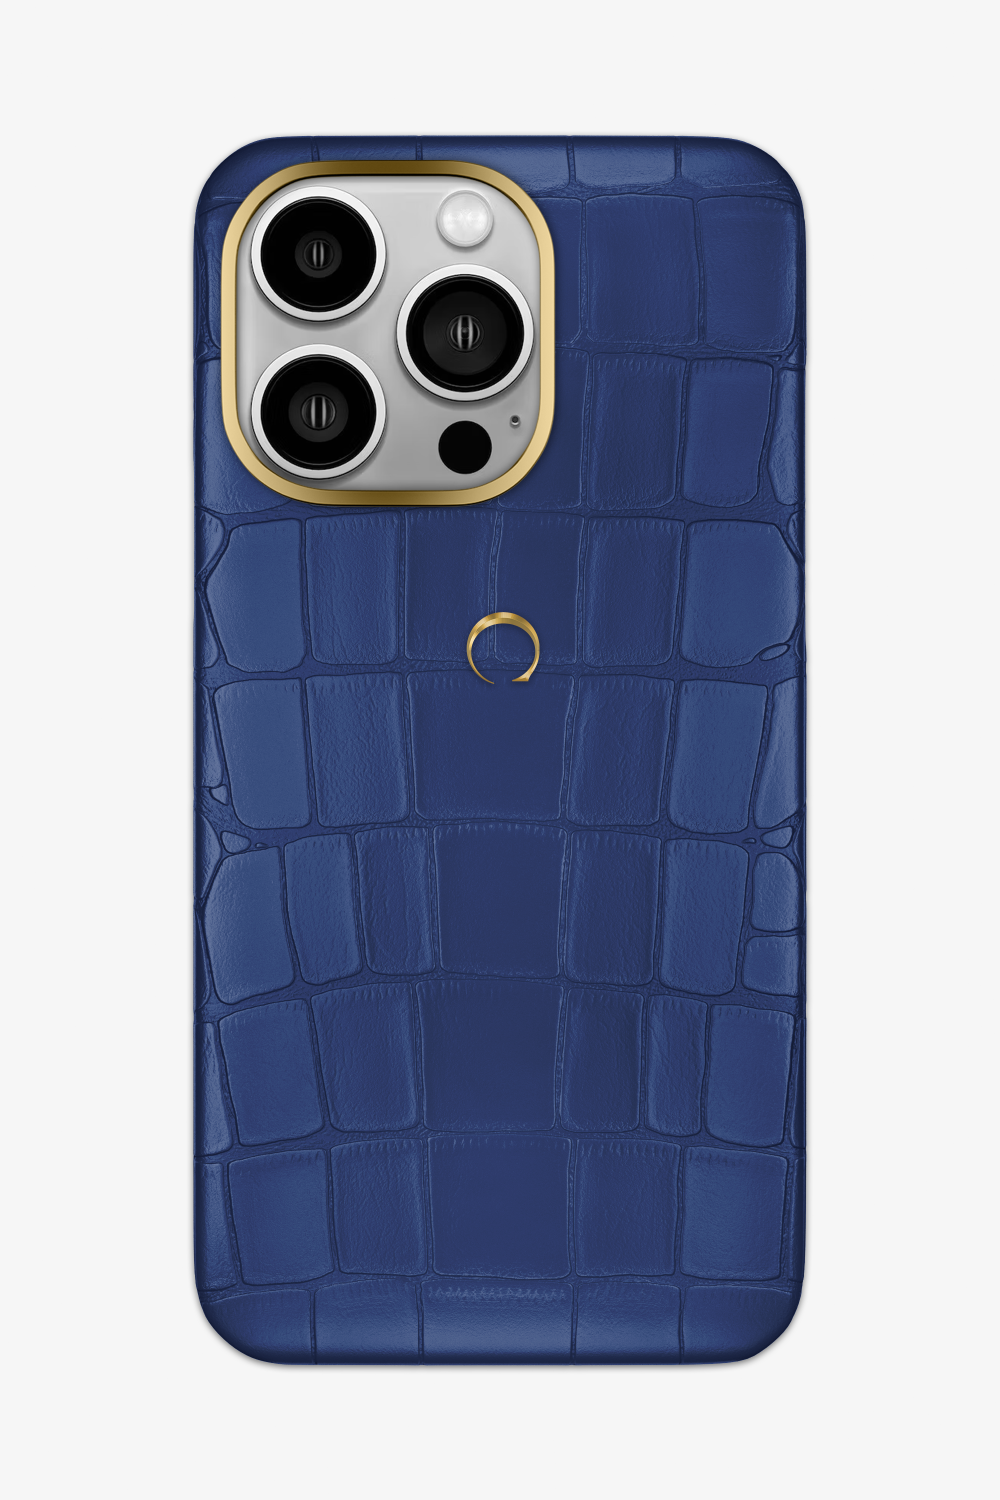 Alligator Case for iPhone 14 Pro Max - Gold / Navy Blue - zollofrance